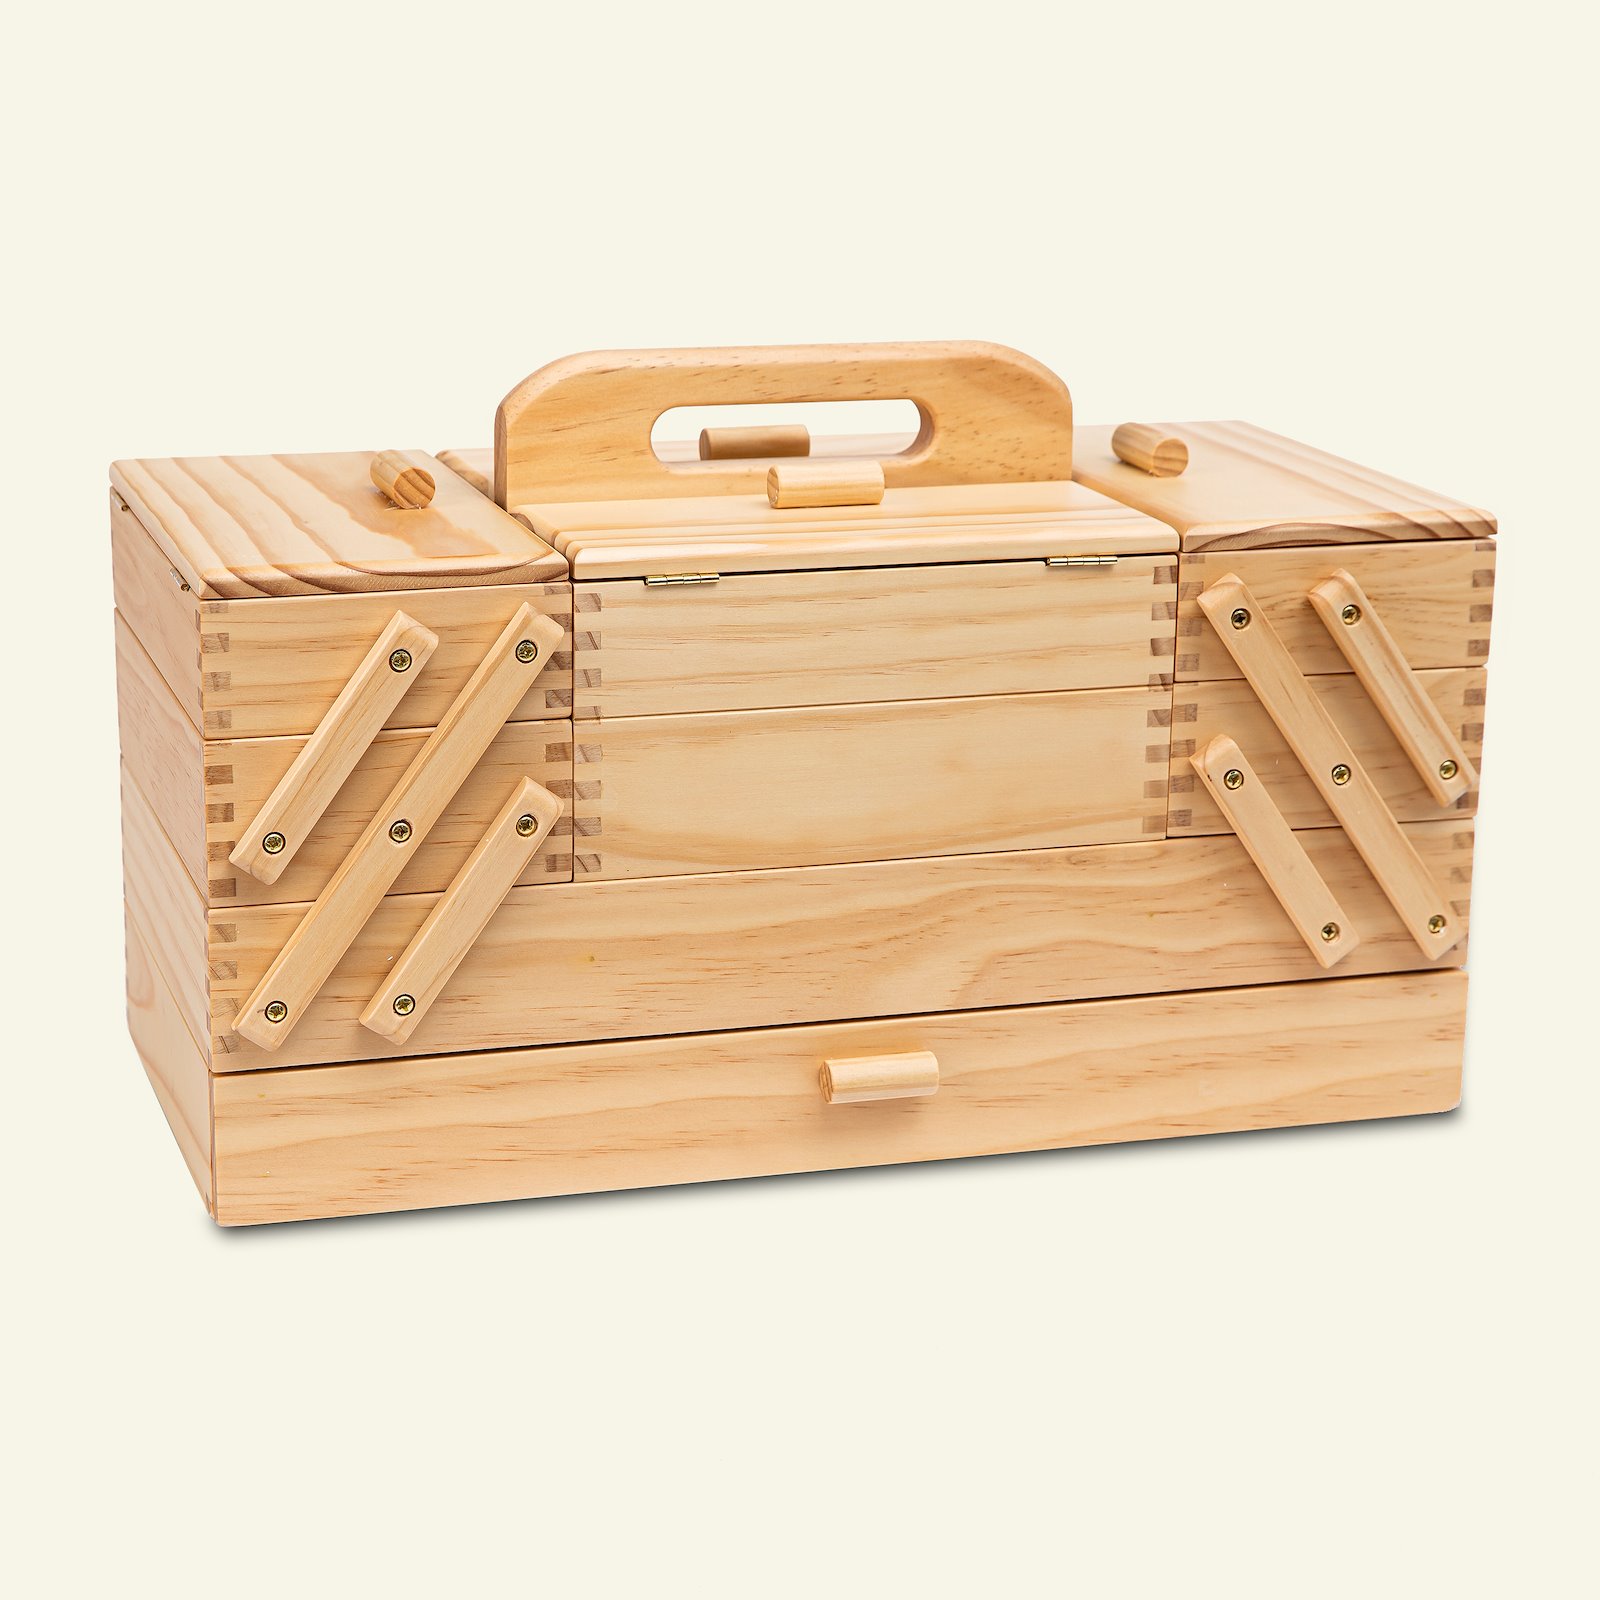 Sewing box wood lacquered 23x45x21cm 46273_pack